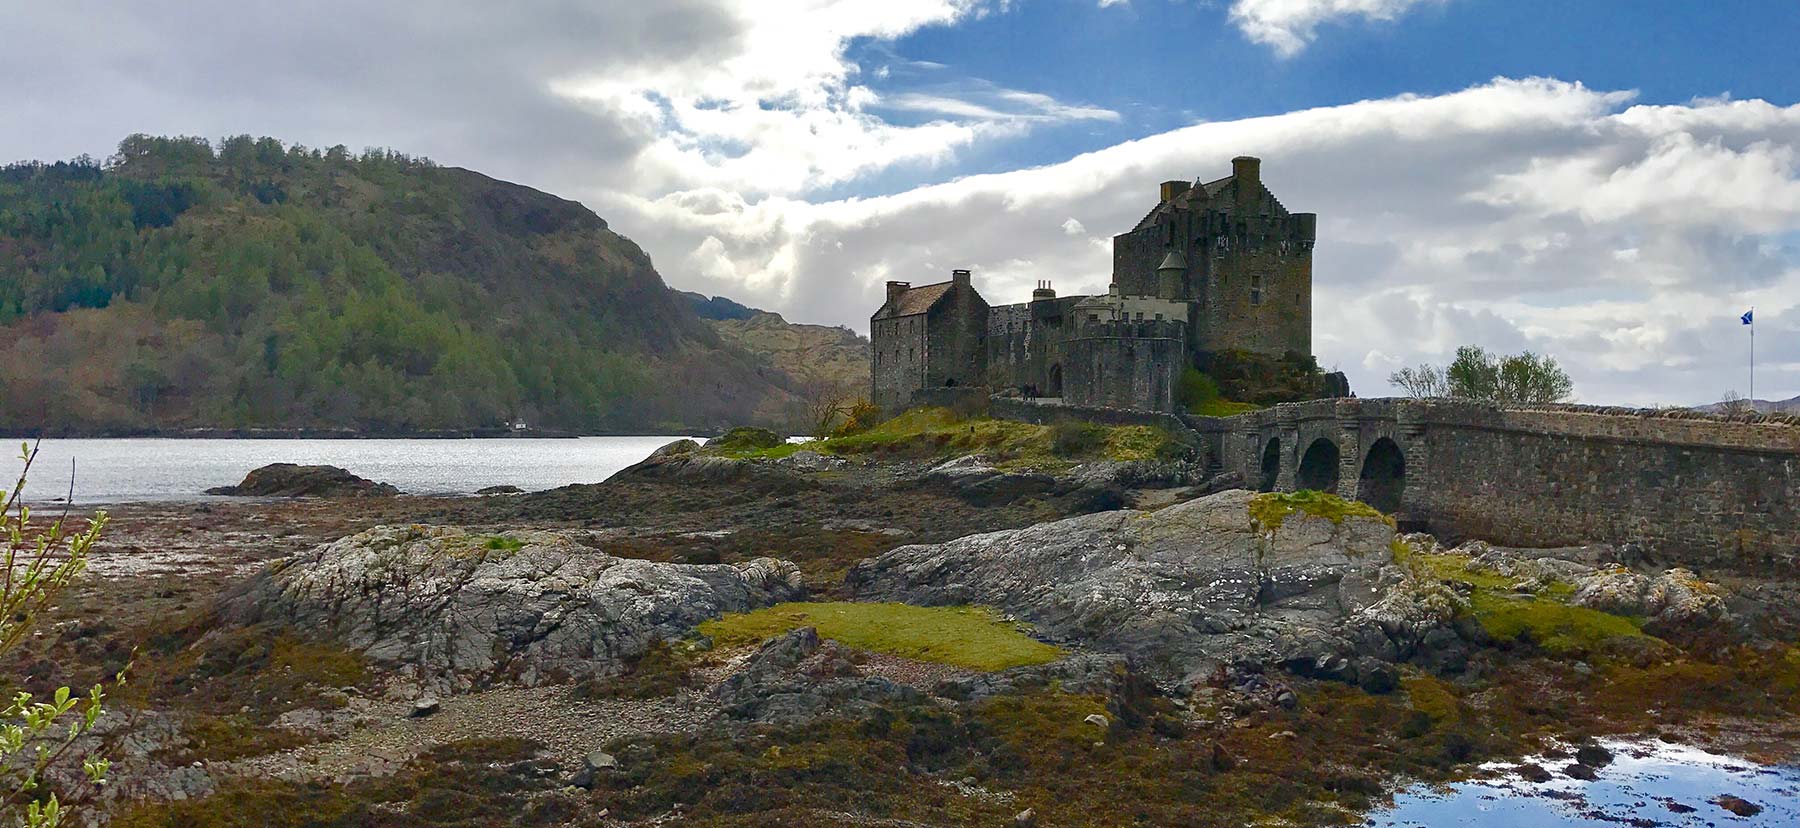 A castle in the Scottish Highlands